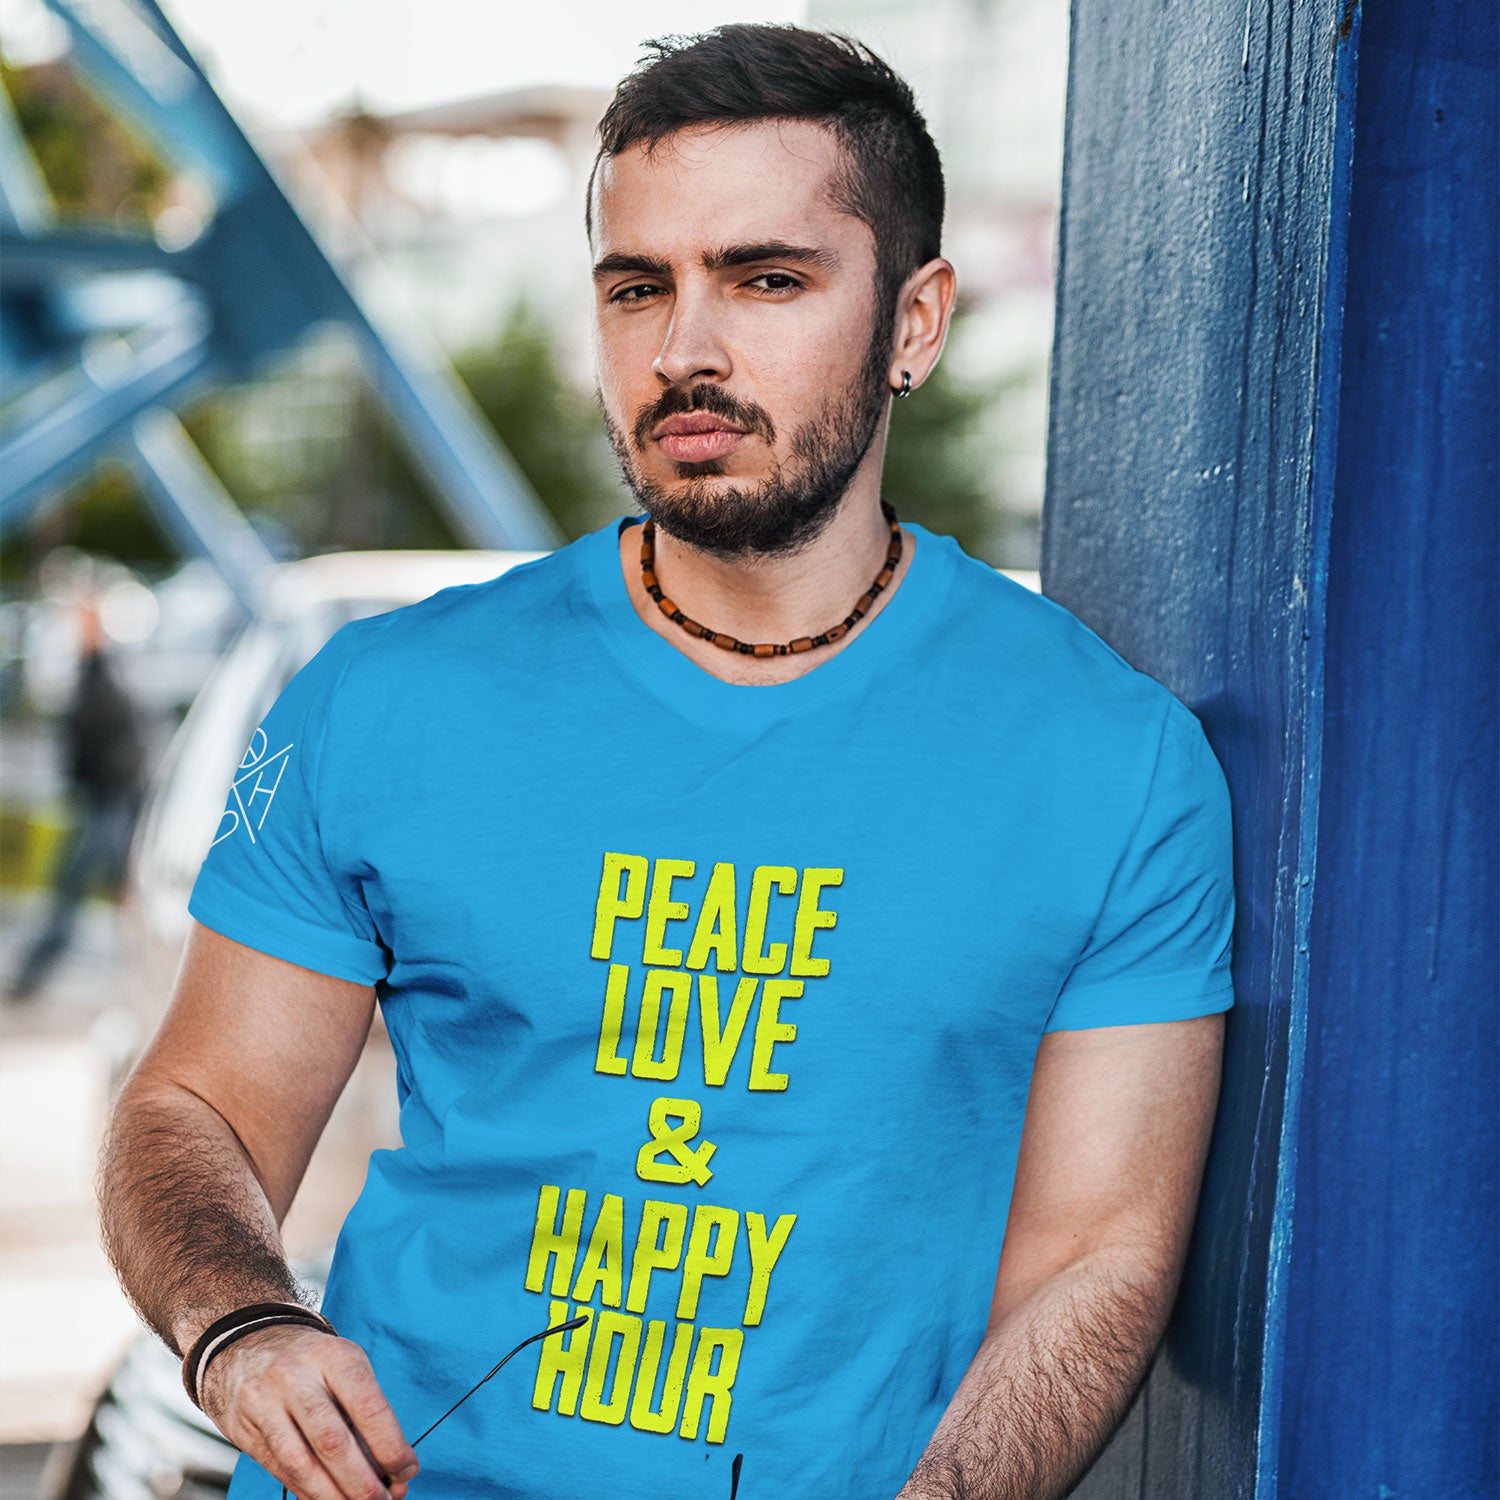 Happy – Love T-Shirt and Vibes Peace Hour Good